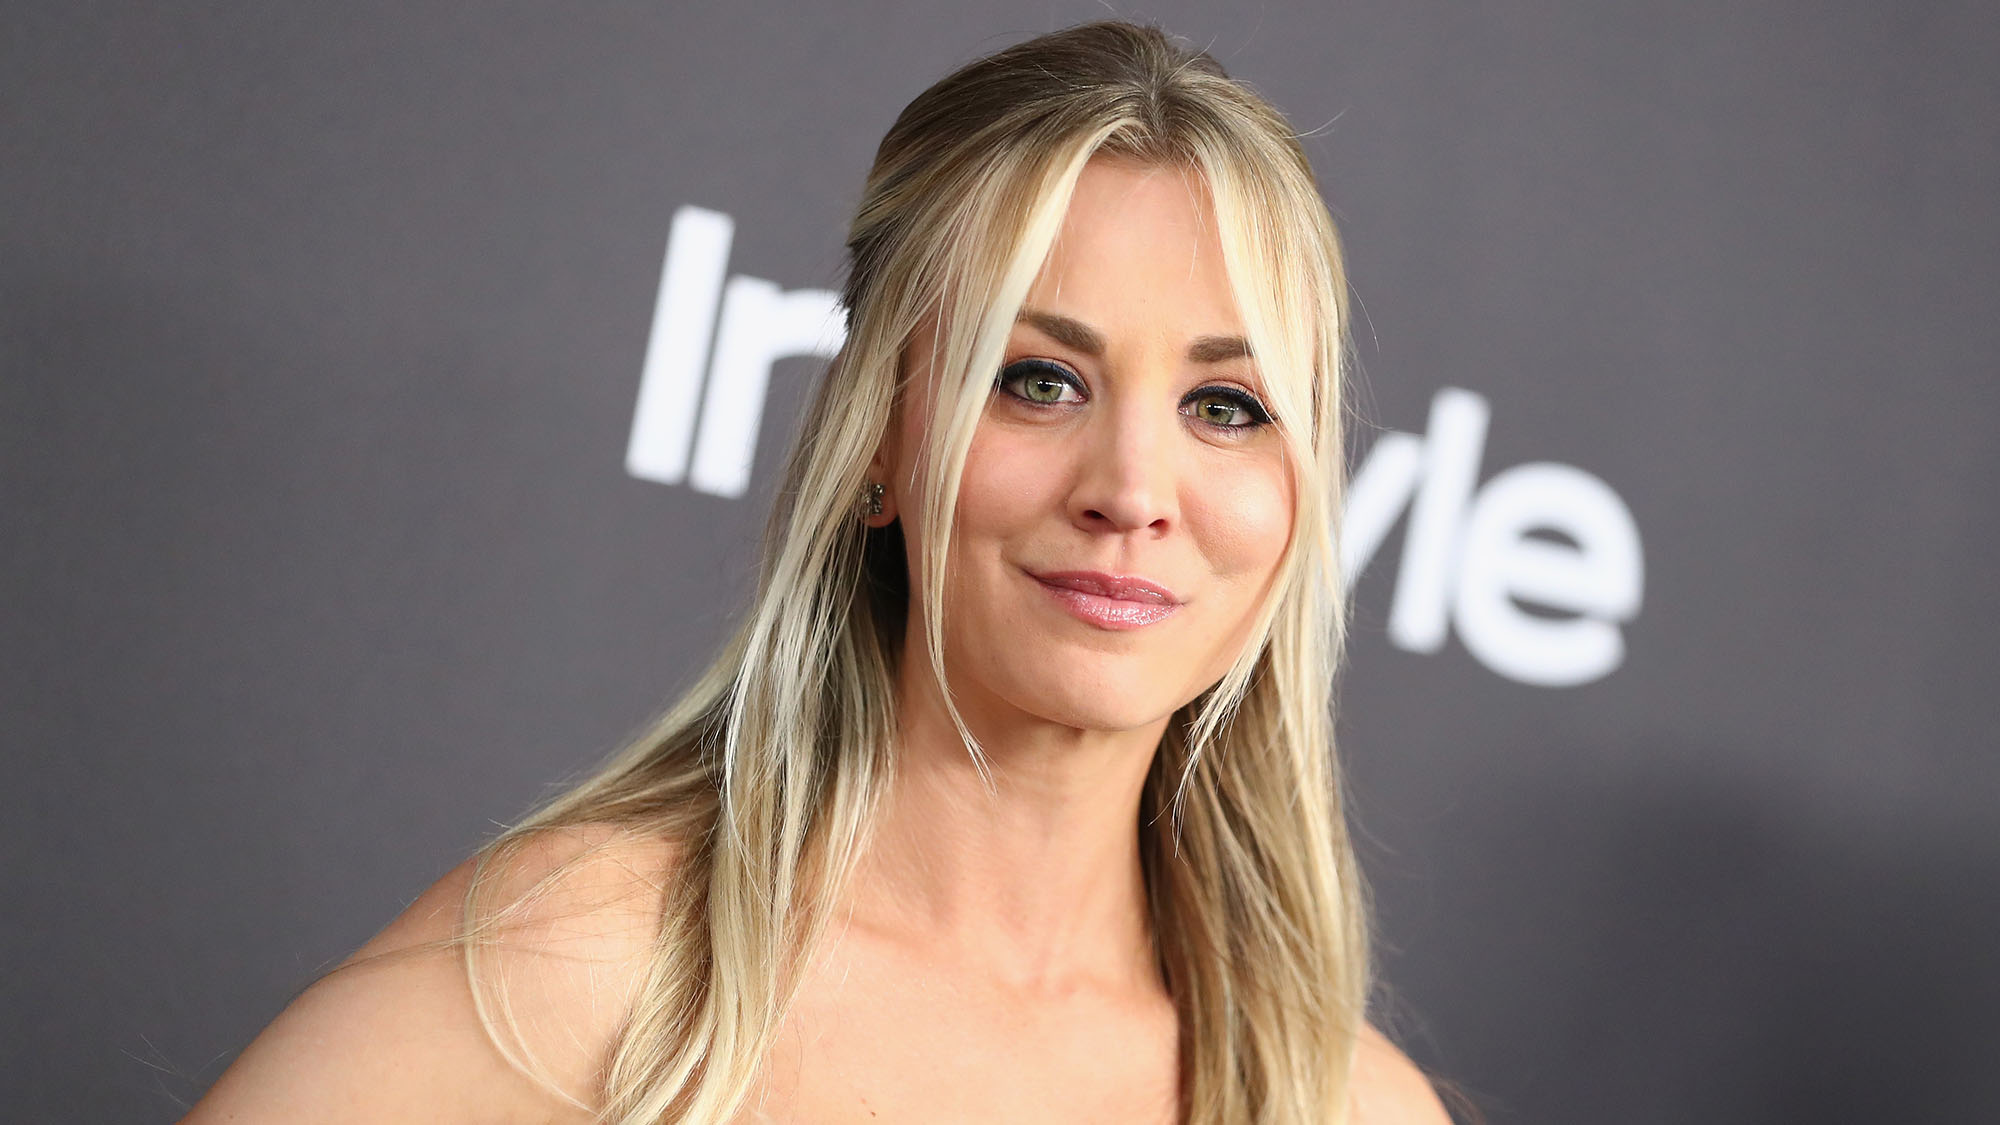 WATCH: Kaley Cuoco Stars in New Trailer for Killer-Thriller Series 'The Flight Attendant'